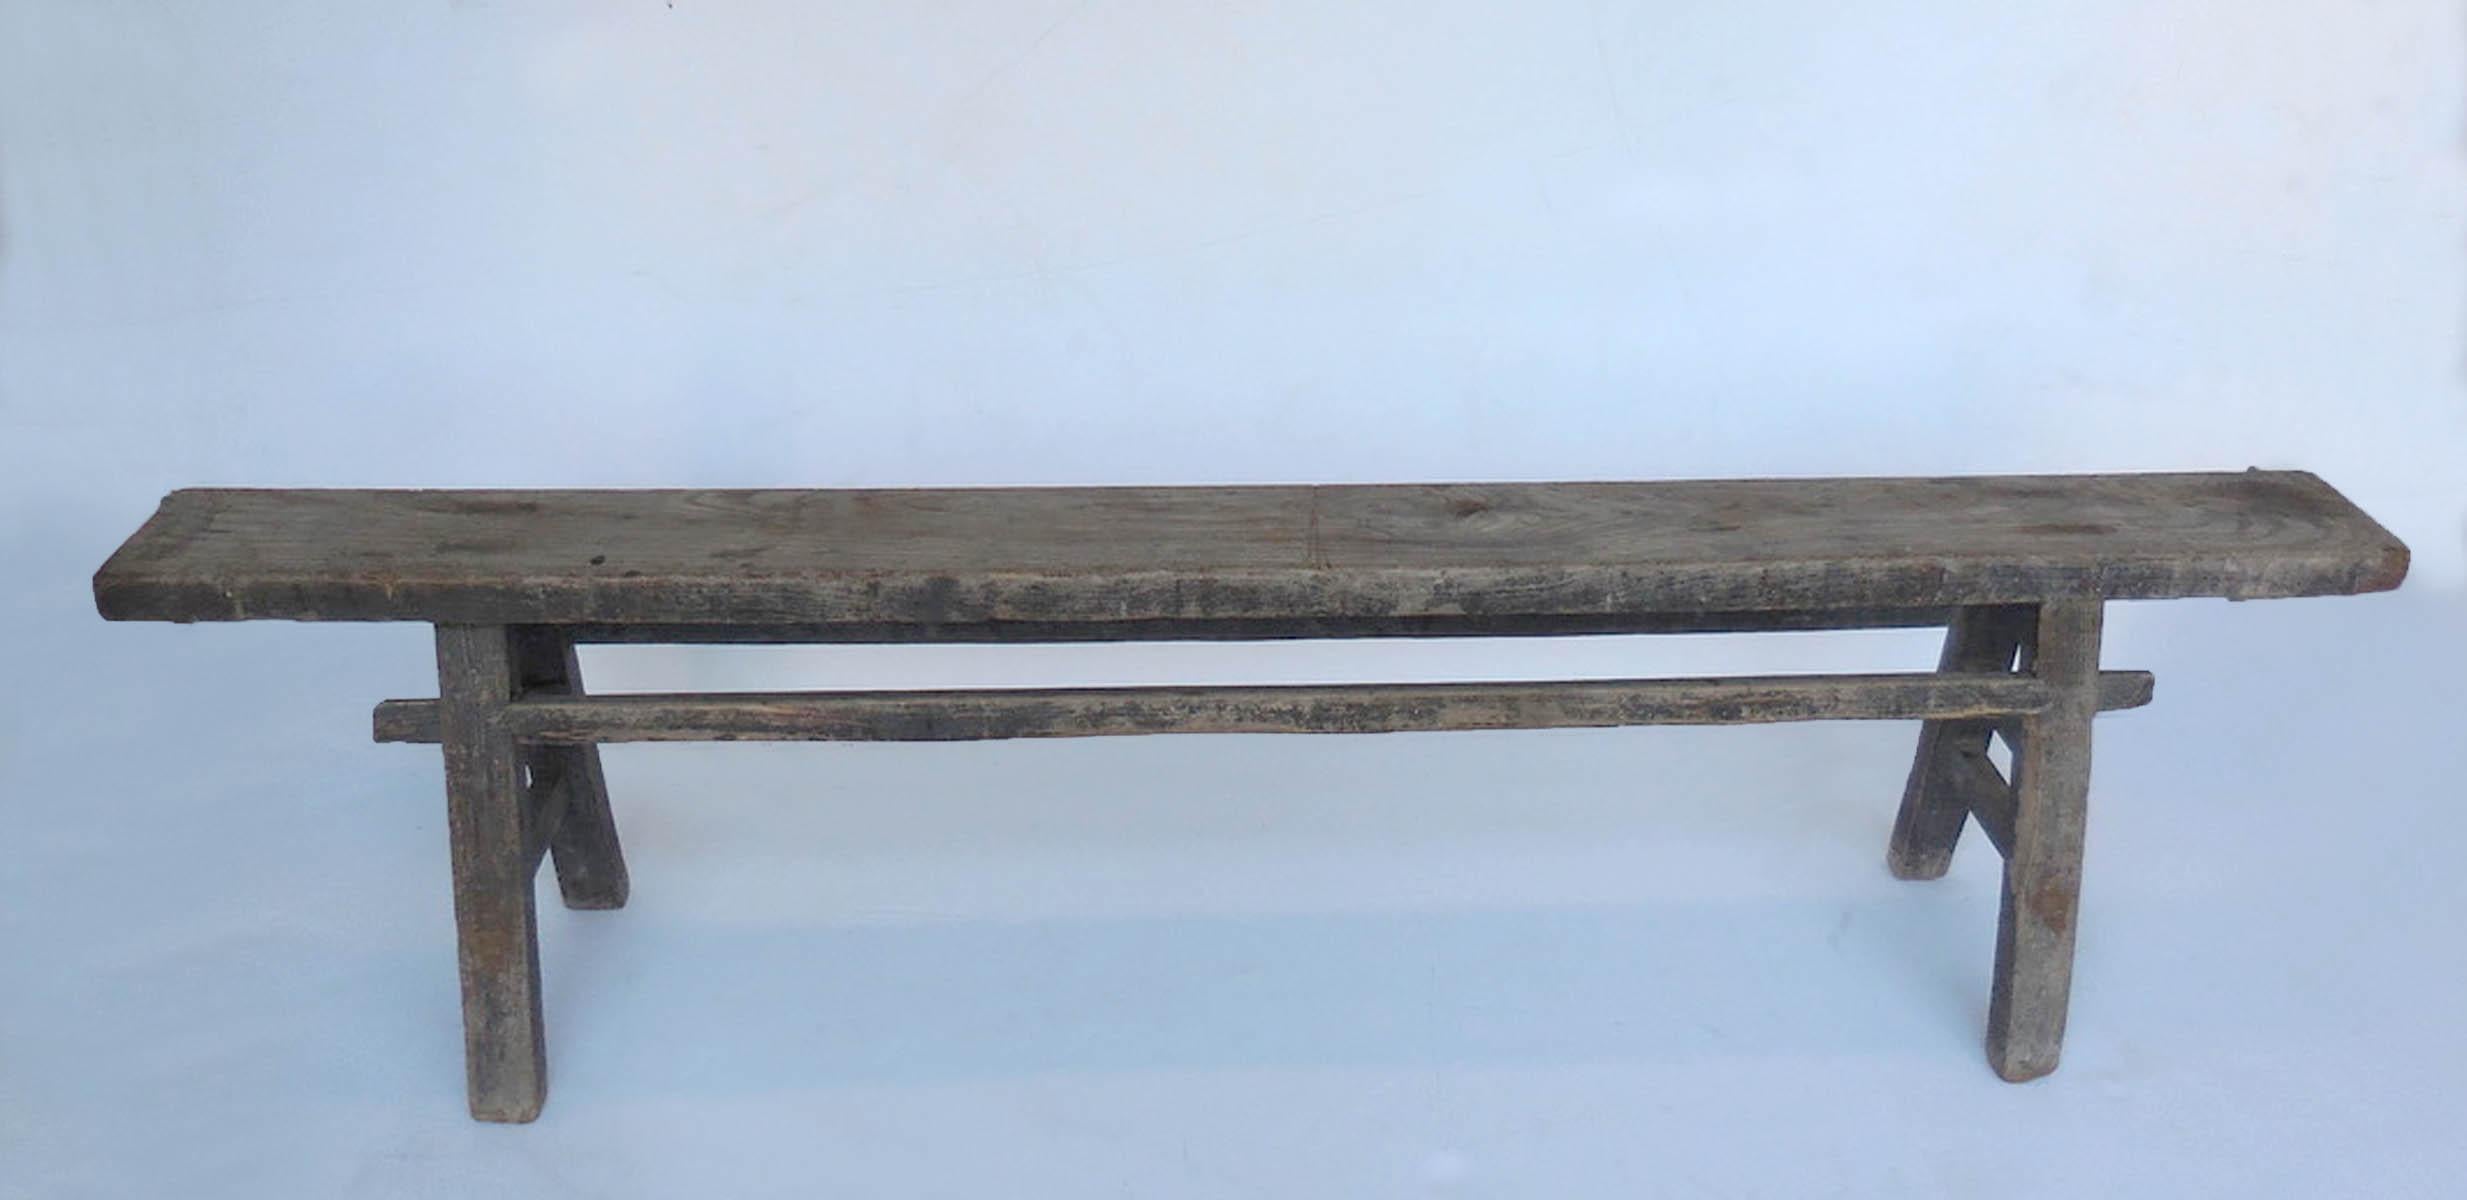 Antique Chinese elm bench. Mortise and Tenon construction. Love old weathered and worn natural patina.
         